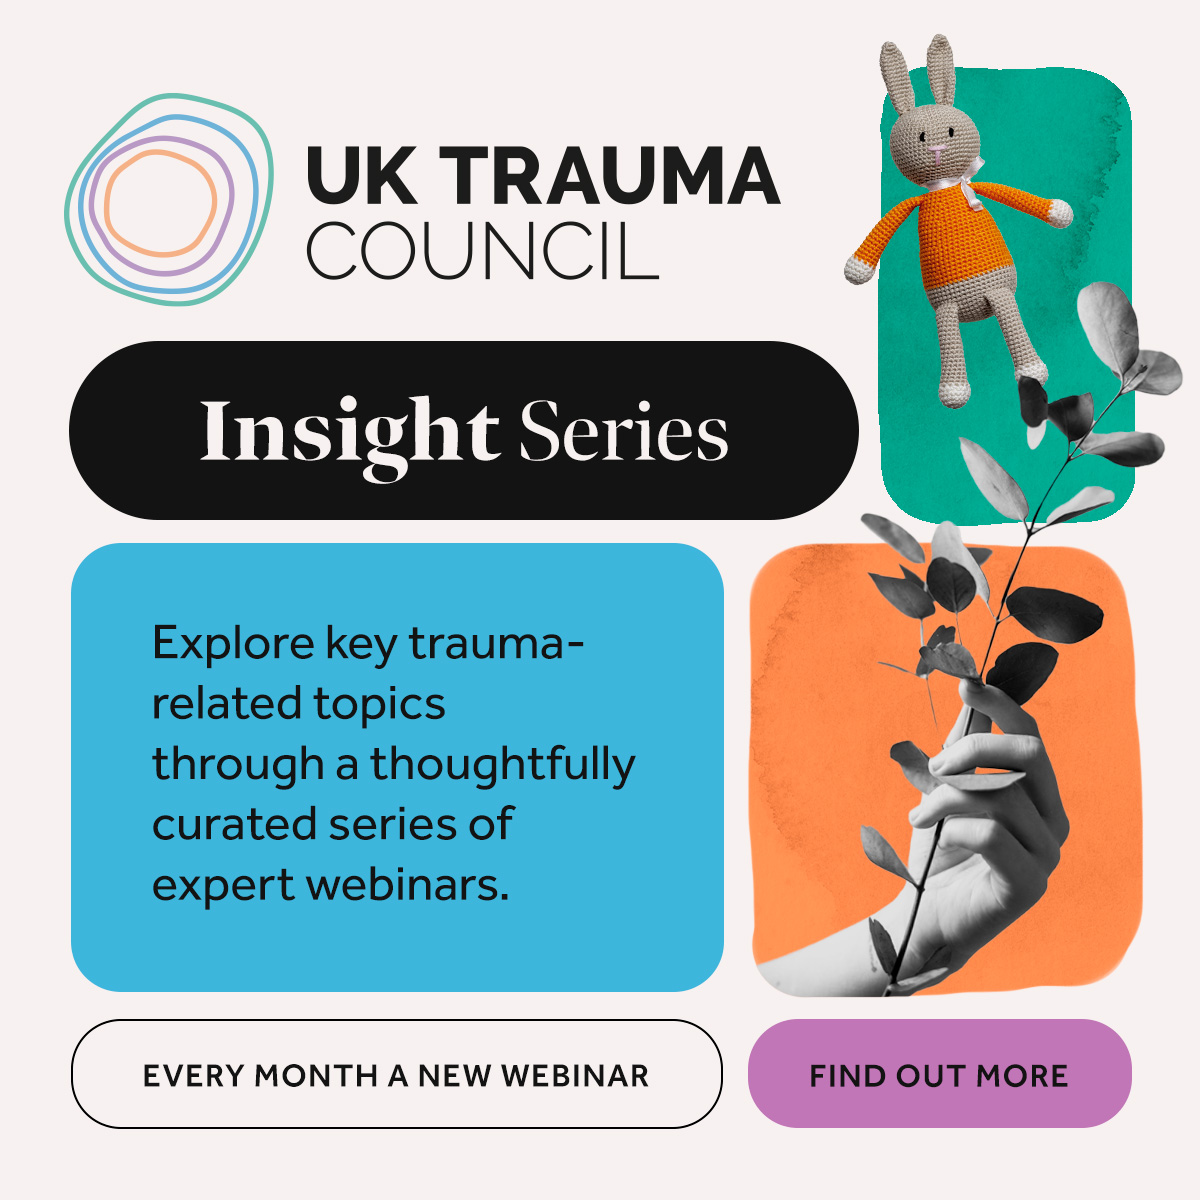 The UK Trauma Council’s new live webinar series provides expert insights into important trauma-related areas affecting children and young people. Upcoming seminars will cover traumatic bereavement, PTSD in young people and childhood trauma. Book: orlo.uk/nmR6p